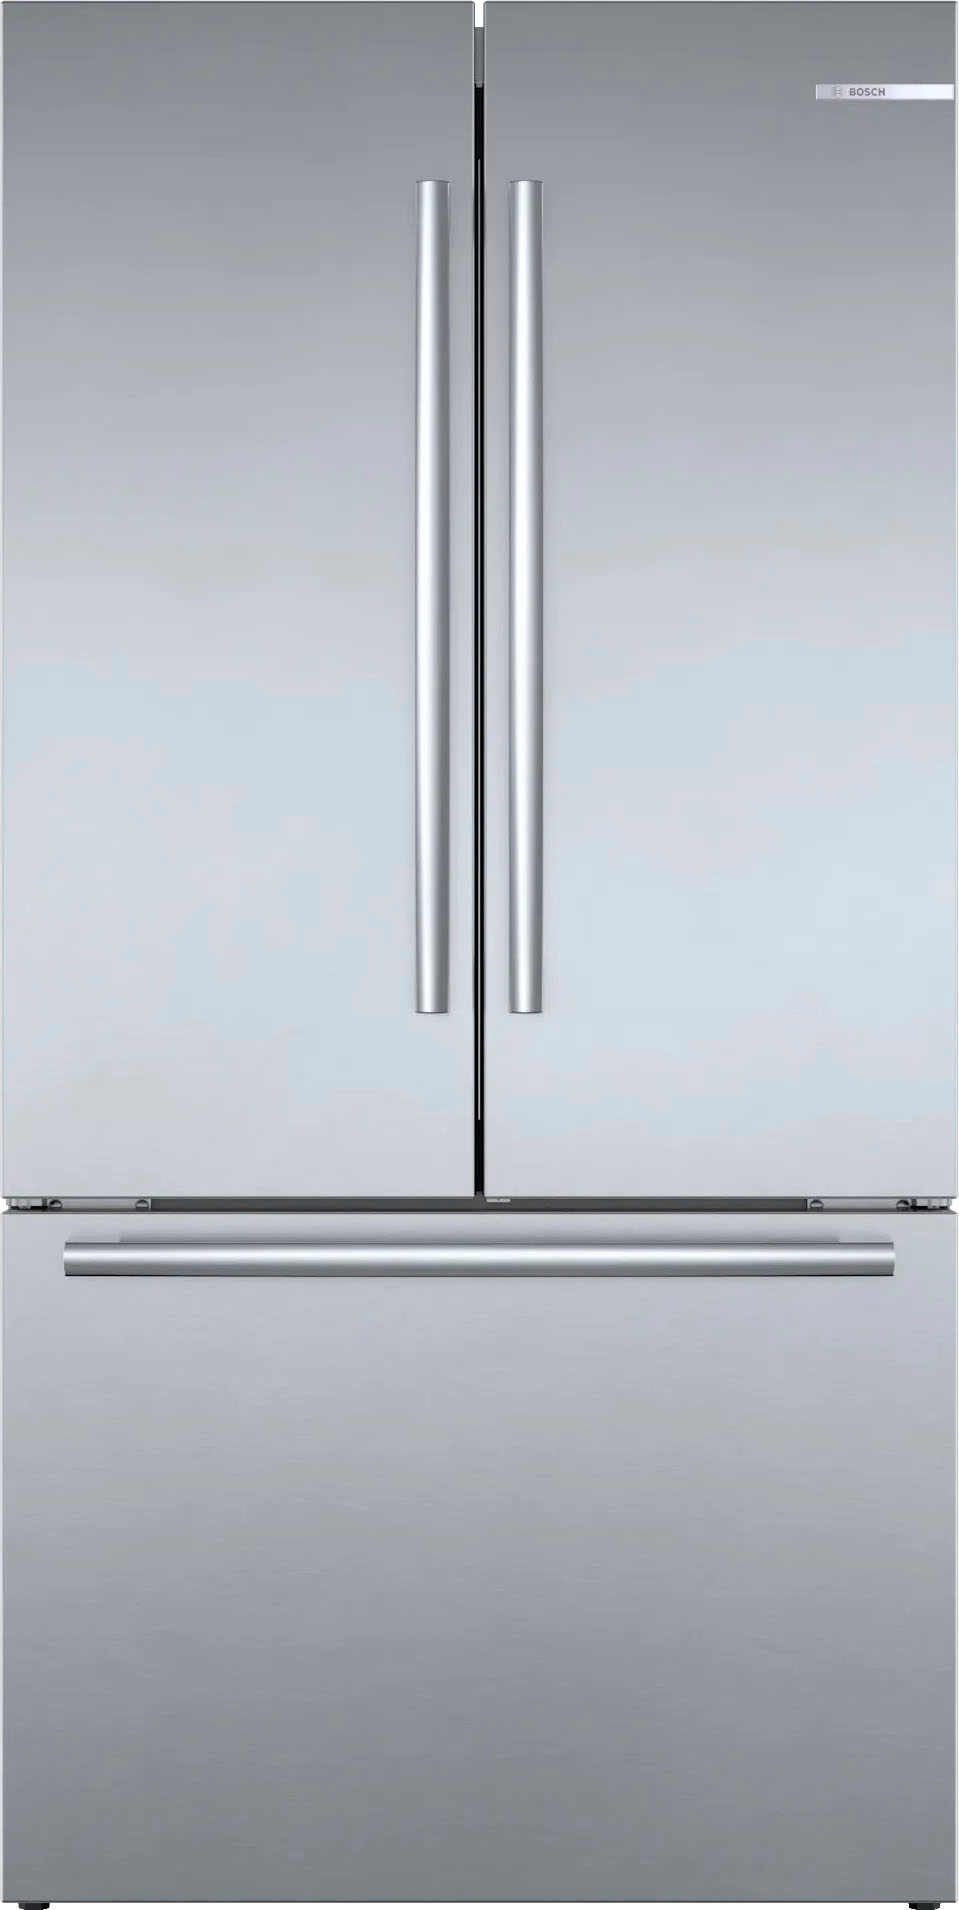 Discover quality,perfection and reliability with Bosch Home Appliances